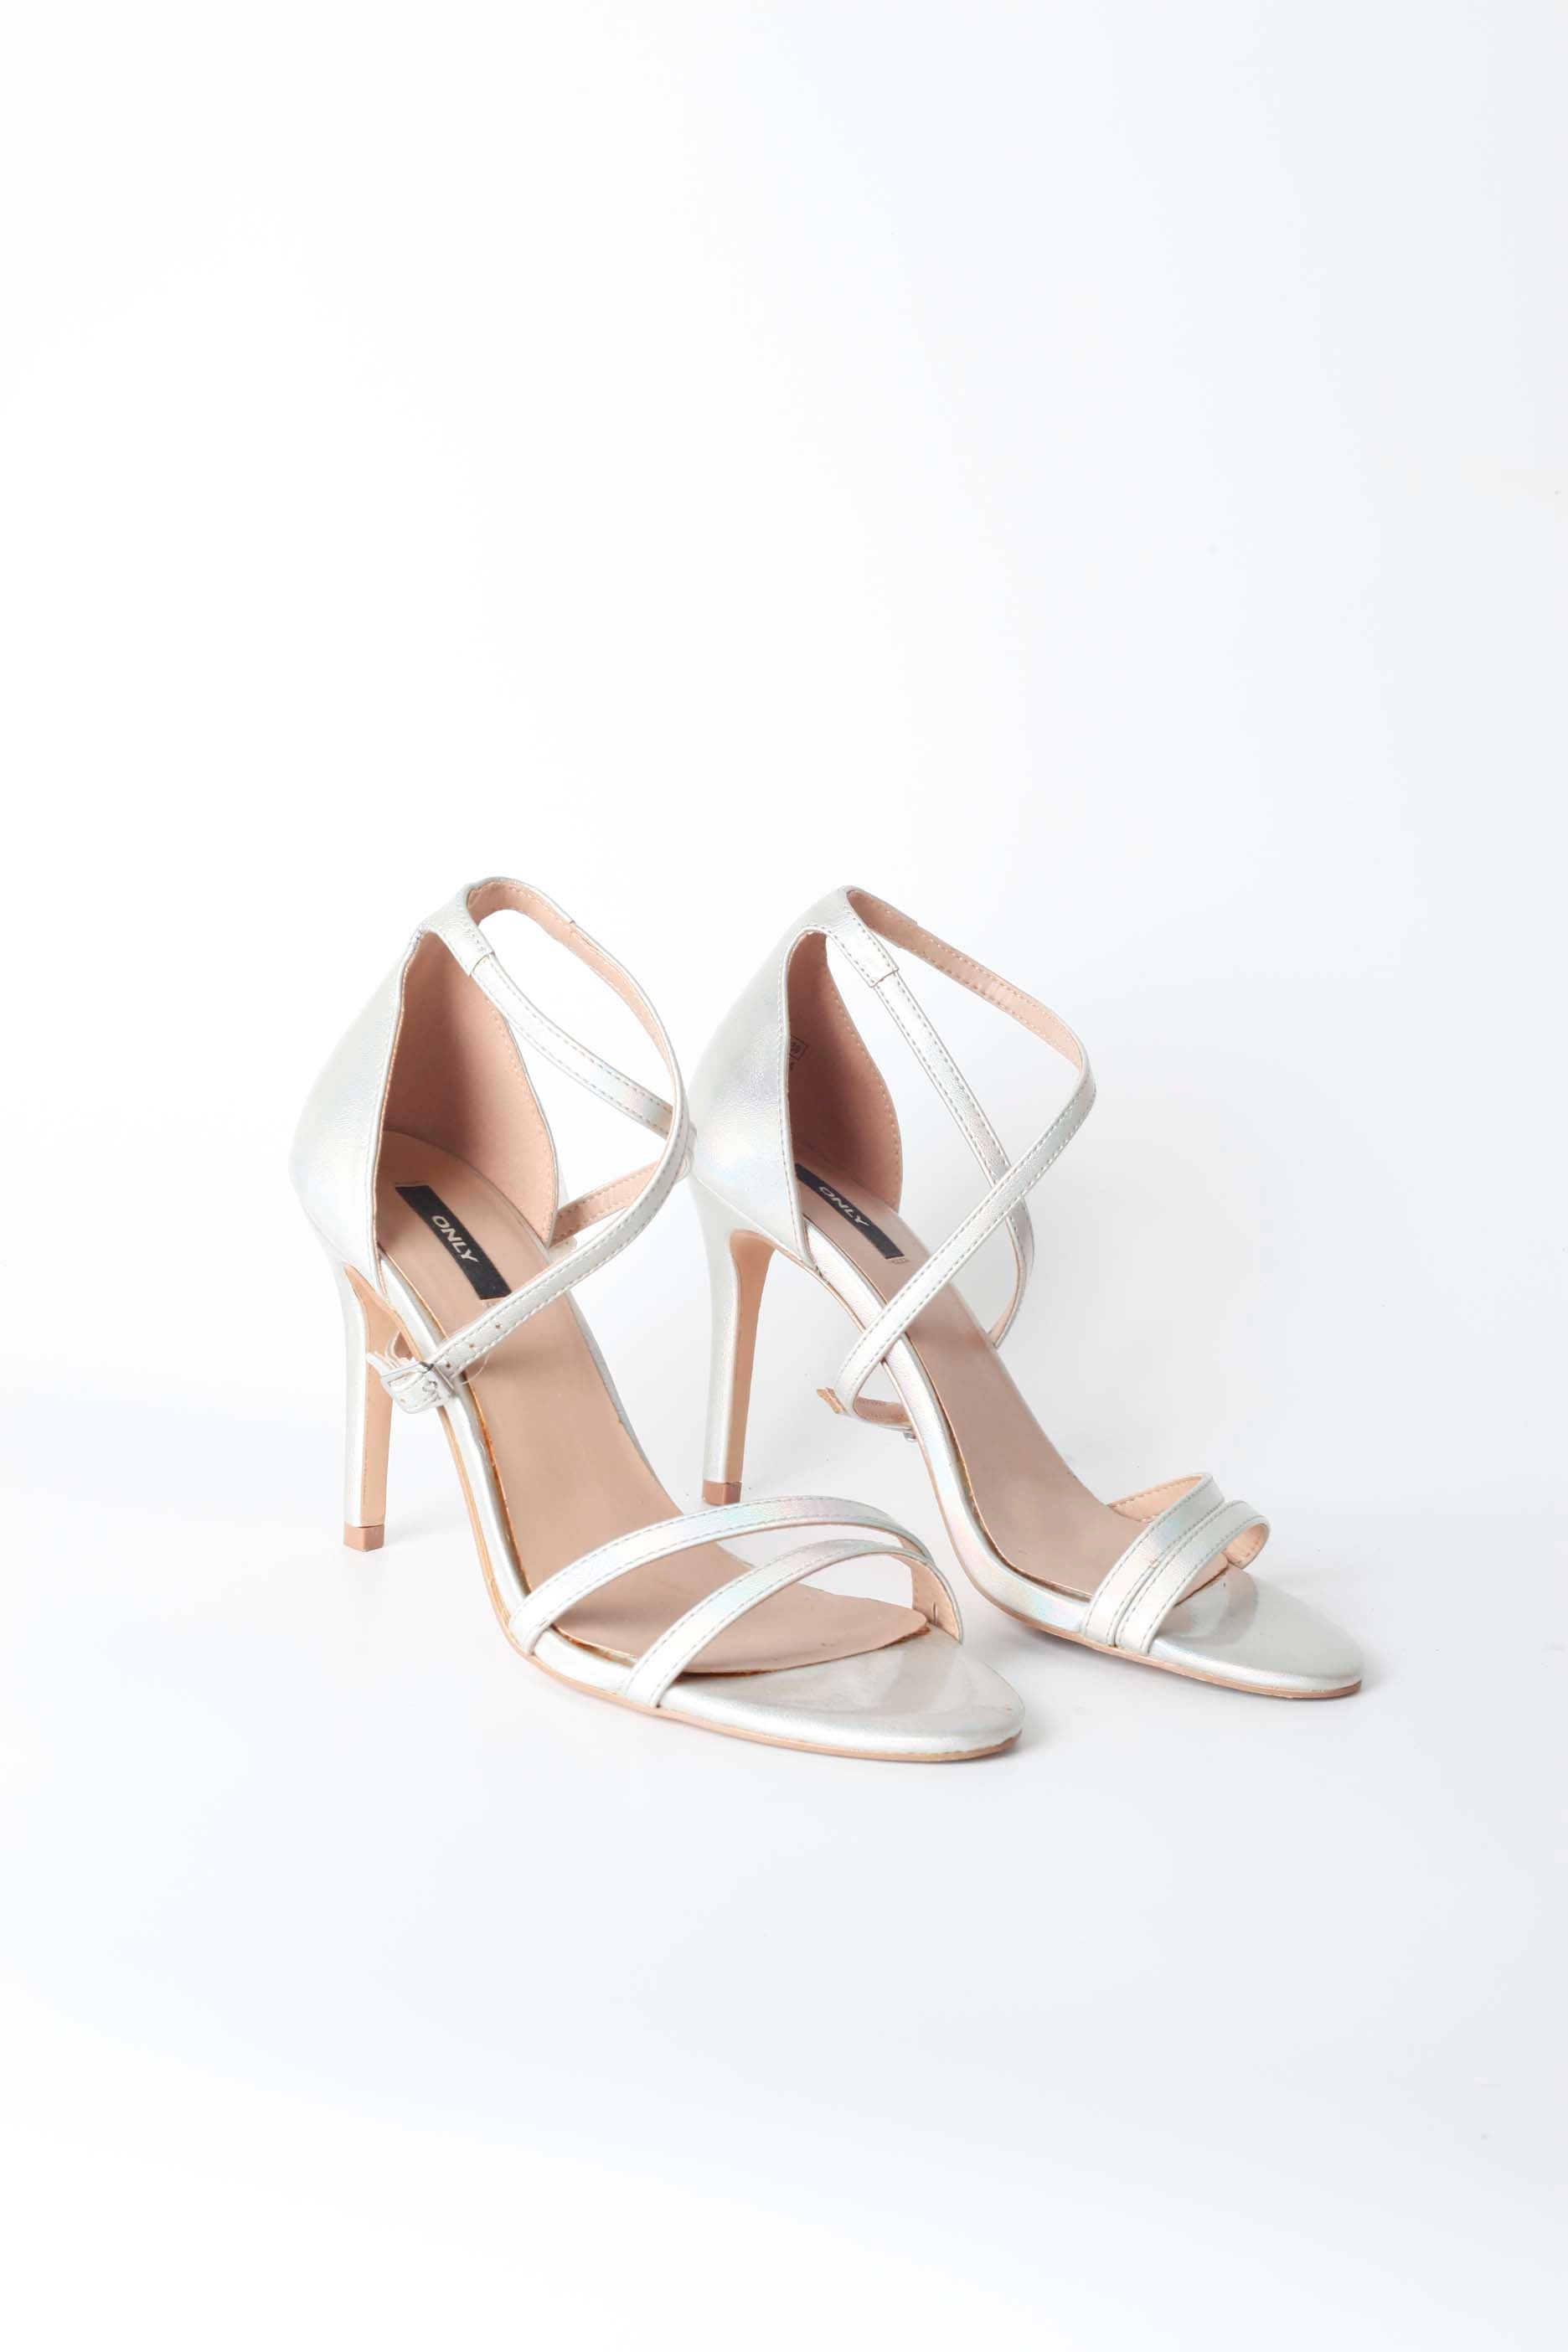 Silver Holographic Strappy High Heels